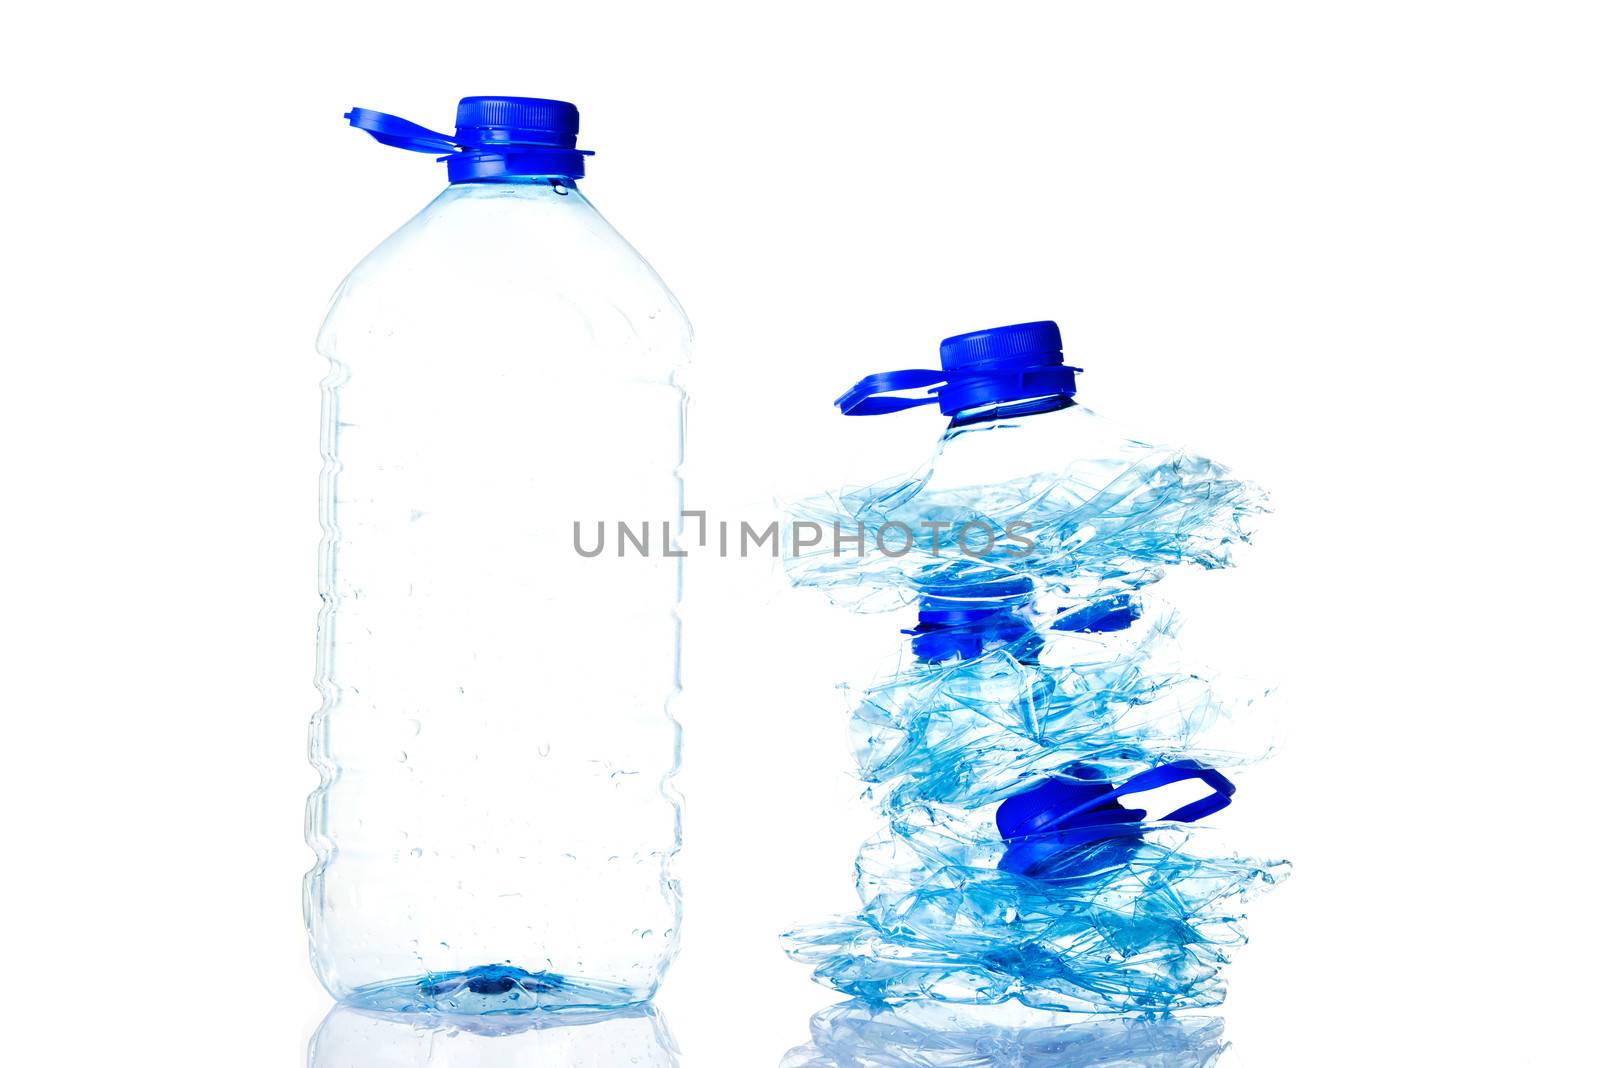 Plastic bottles prepared for recycling. Isolated on white.